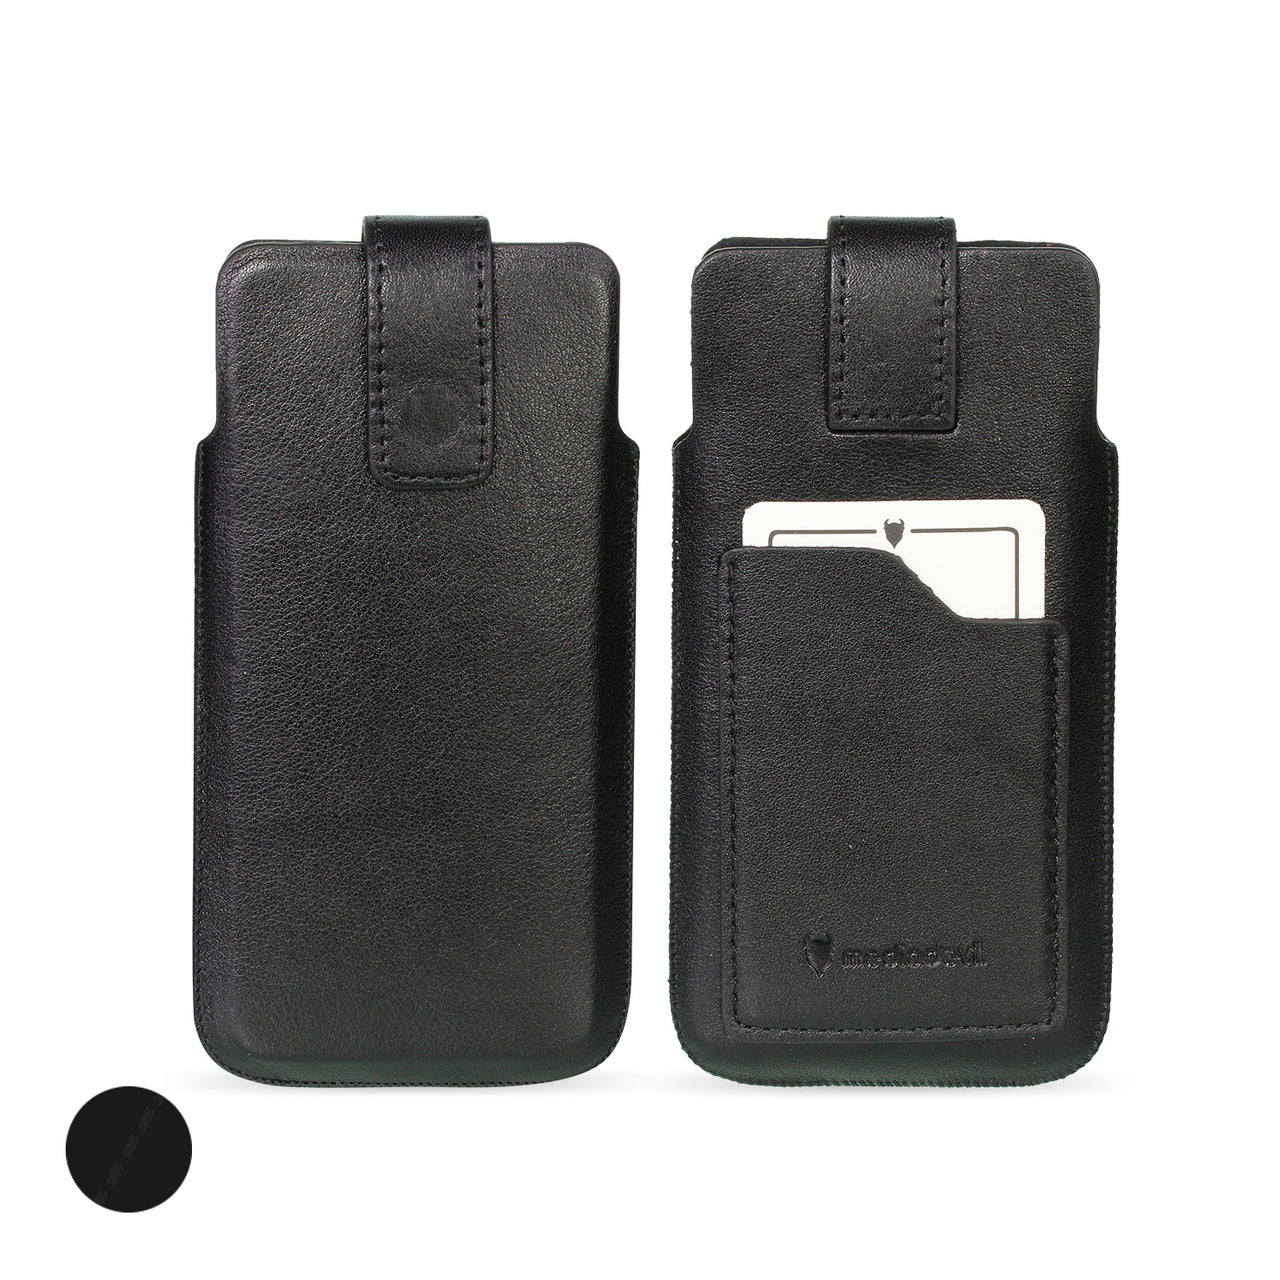 Genuine Leather Pouch Phone Case - Universal Size 4 (L)